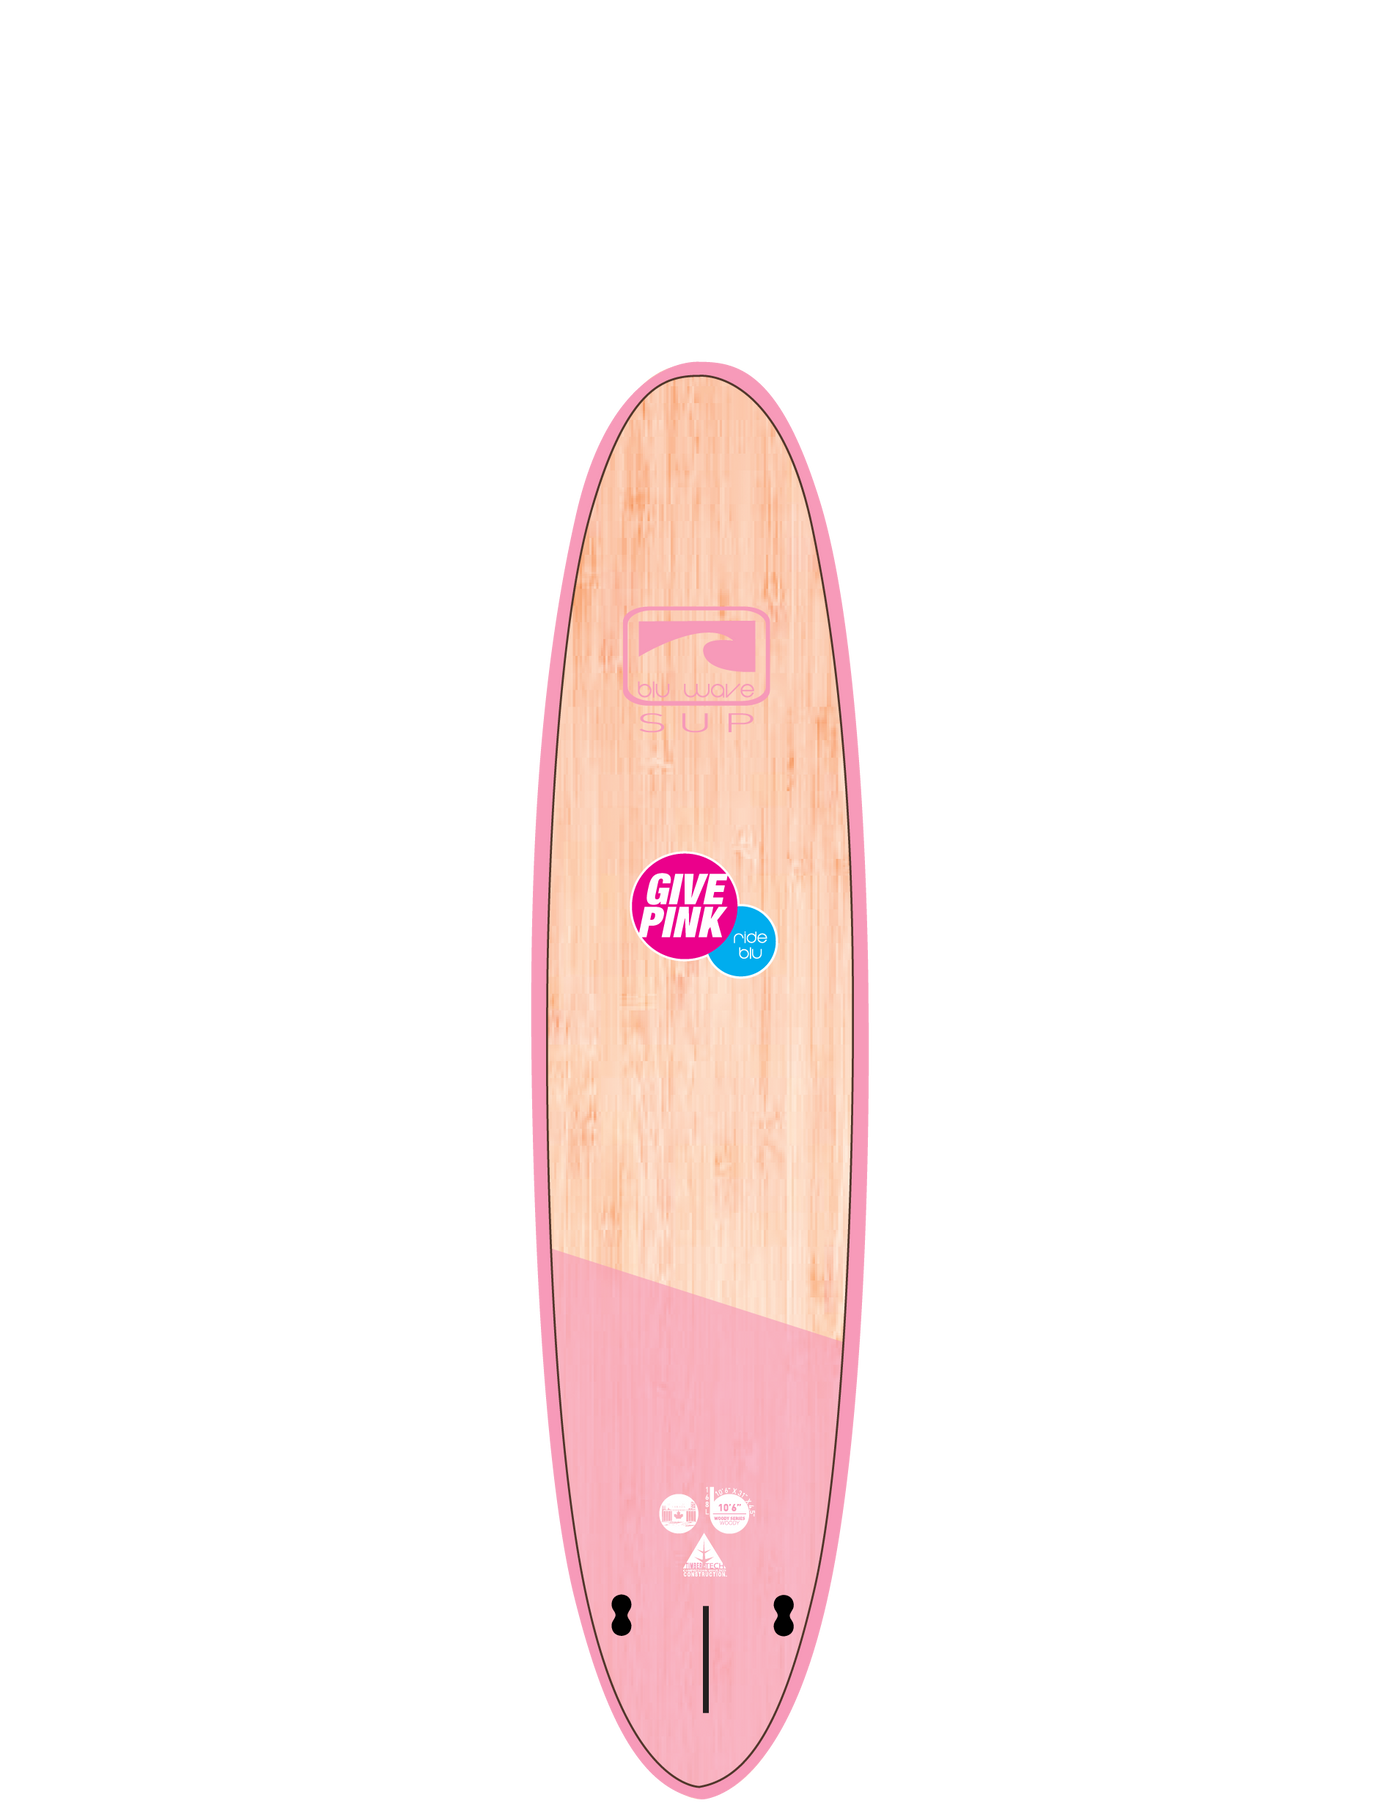 The Woody 10.6 GIVE PINK Edition